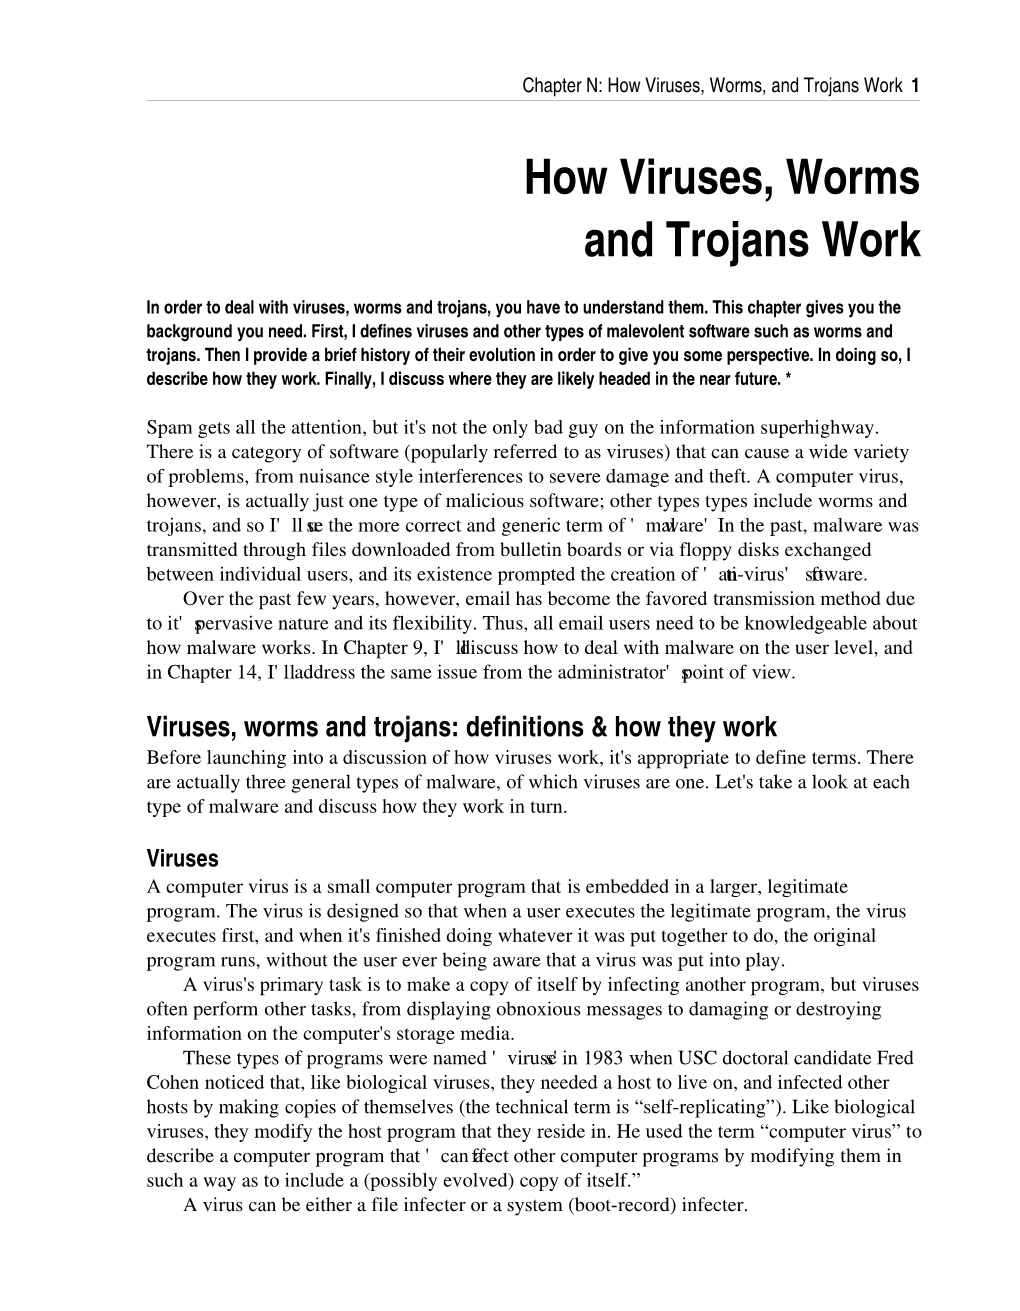 How Viruses, Worms and Trojans Work